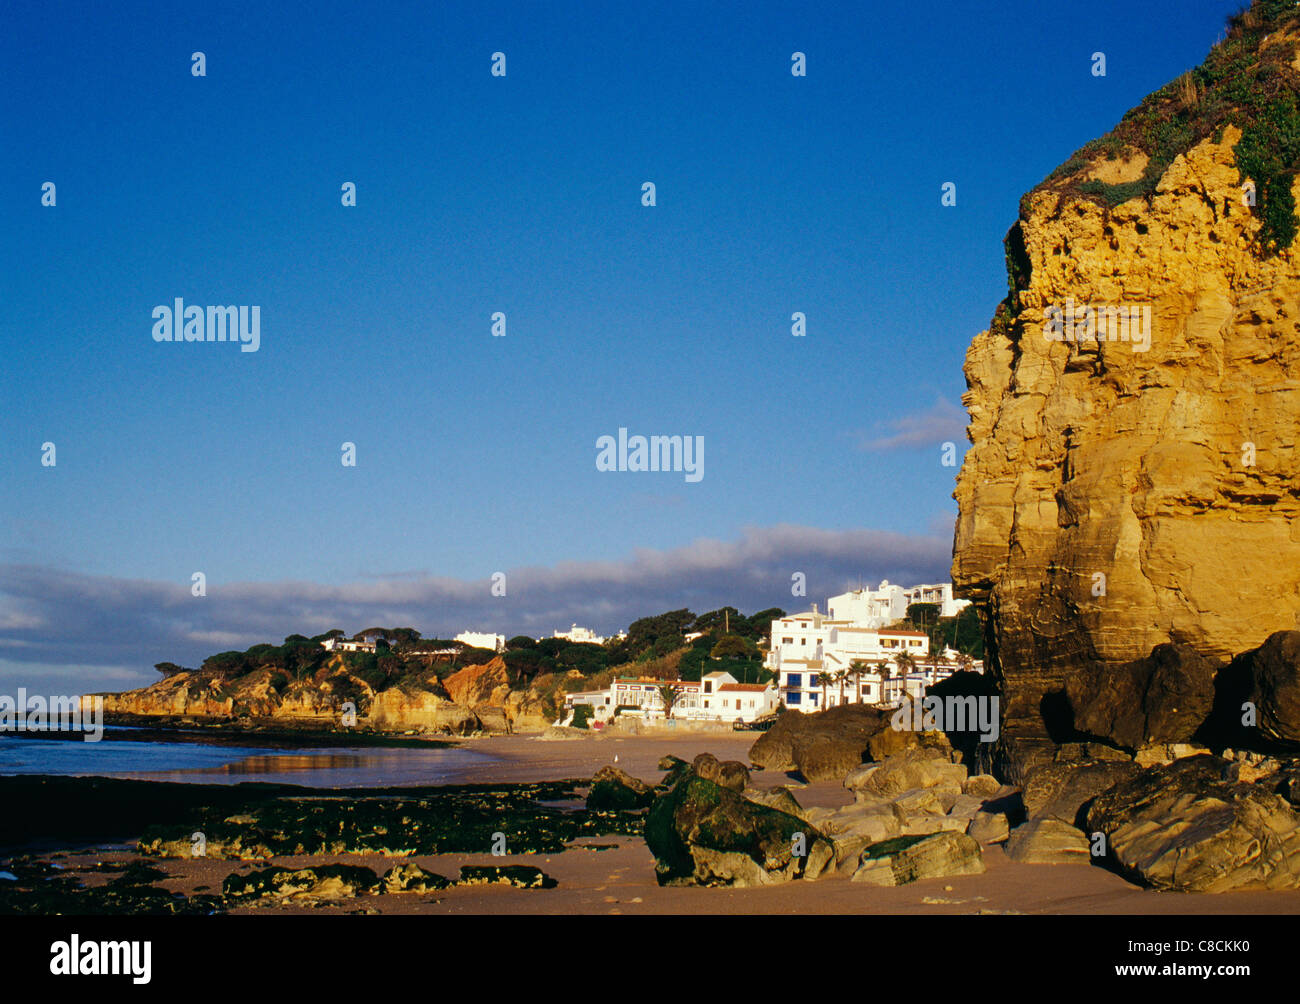 Village and seaside at Olhos d'Agua Stock Photo